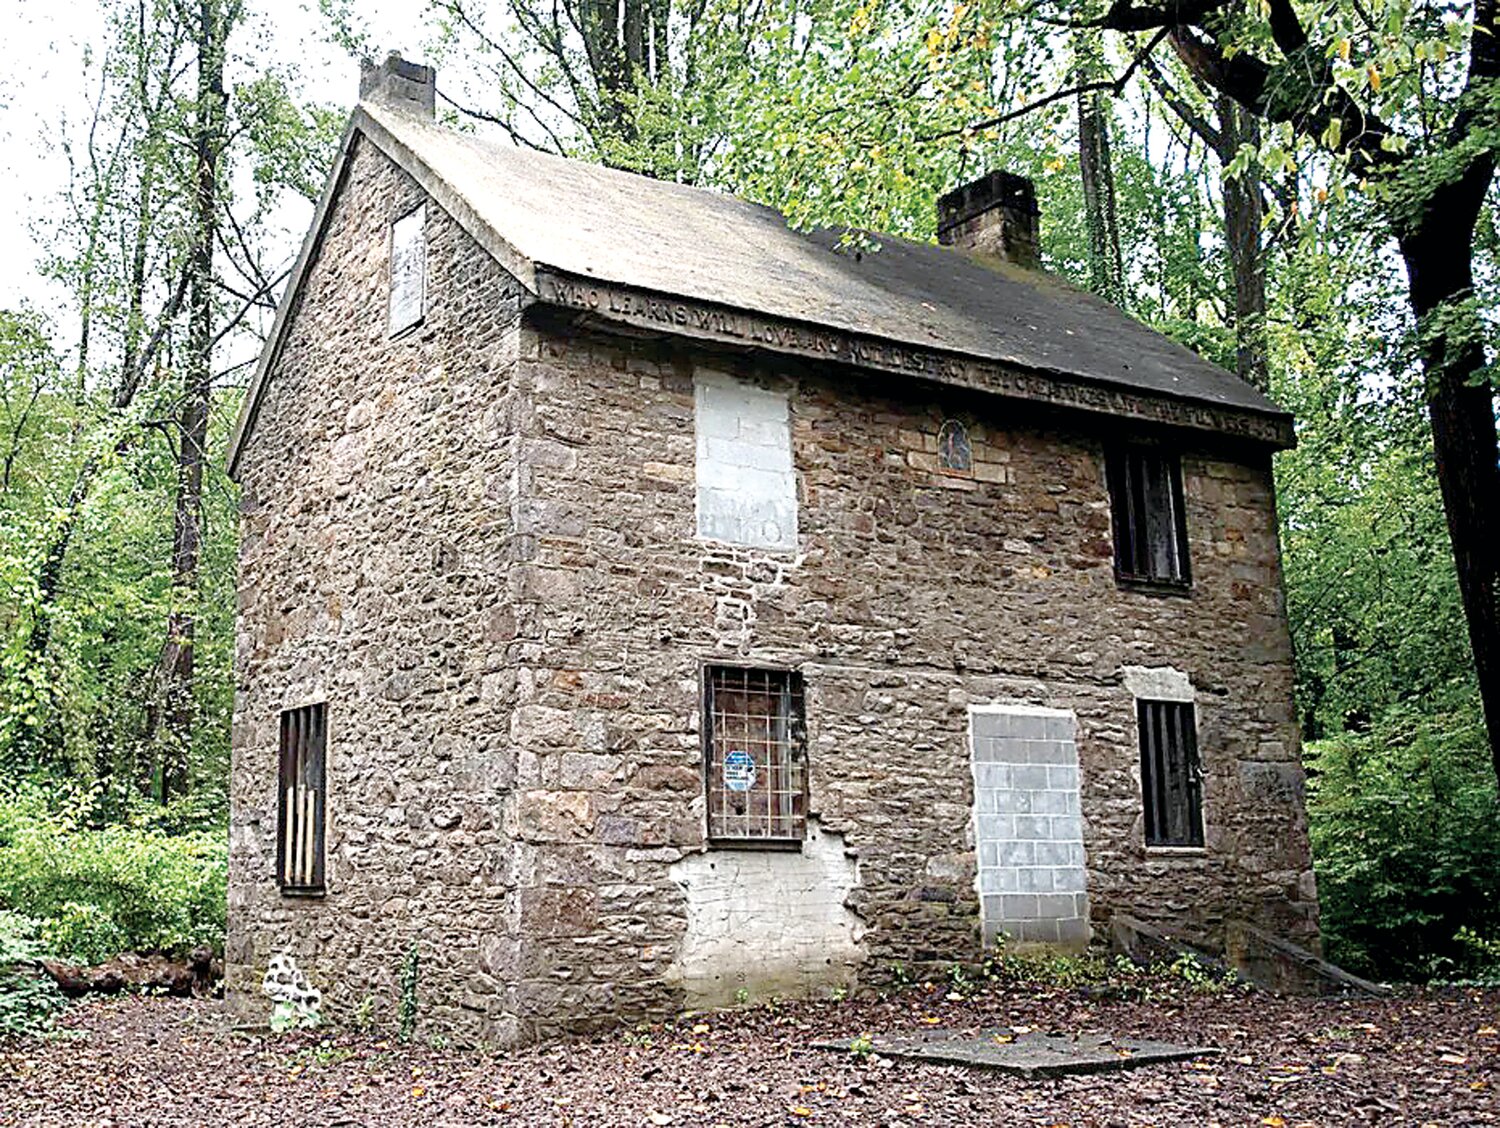 The Doylestown Nature Club operated out of a renovated 18th century stone farmhouse on Henry Mercer’s Fonthill estate for the club’s use.